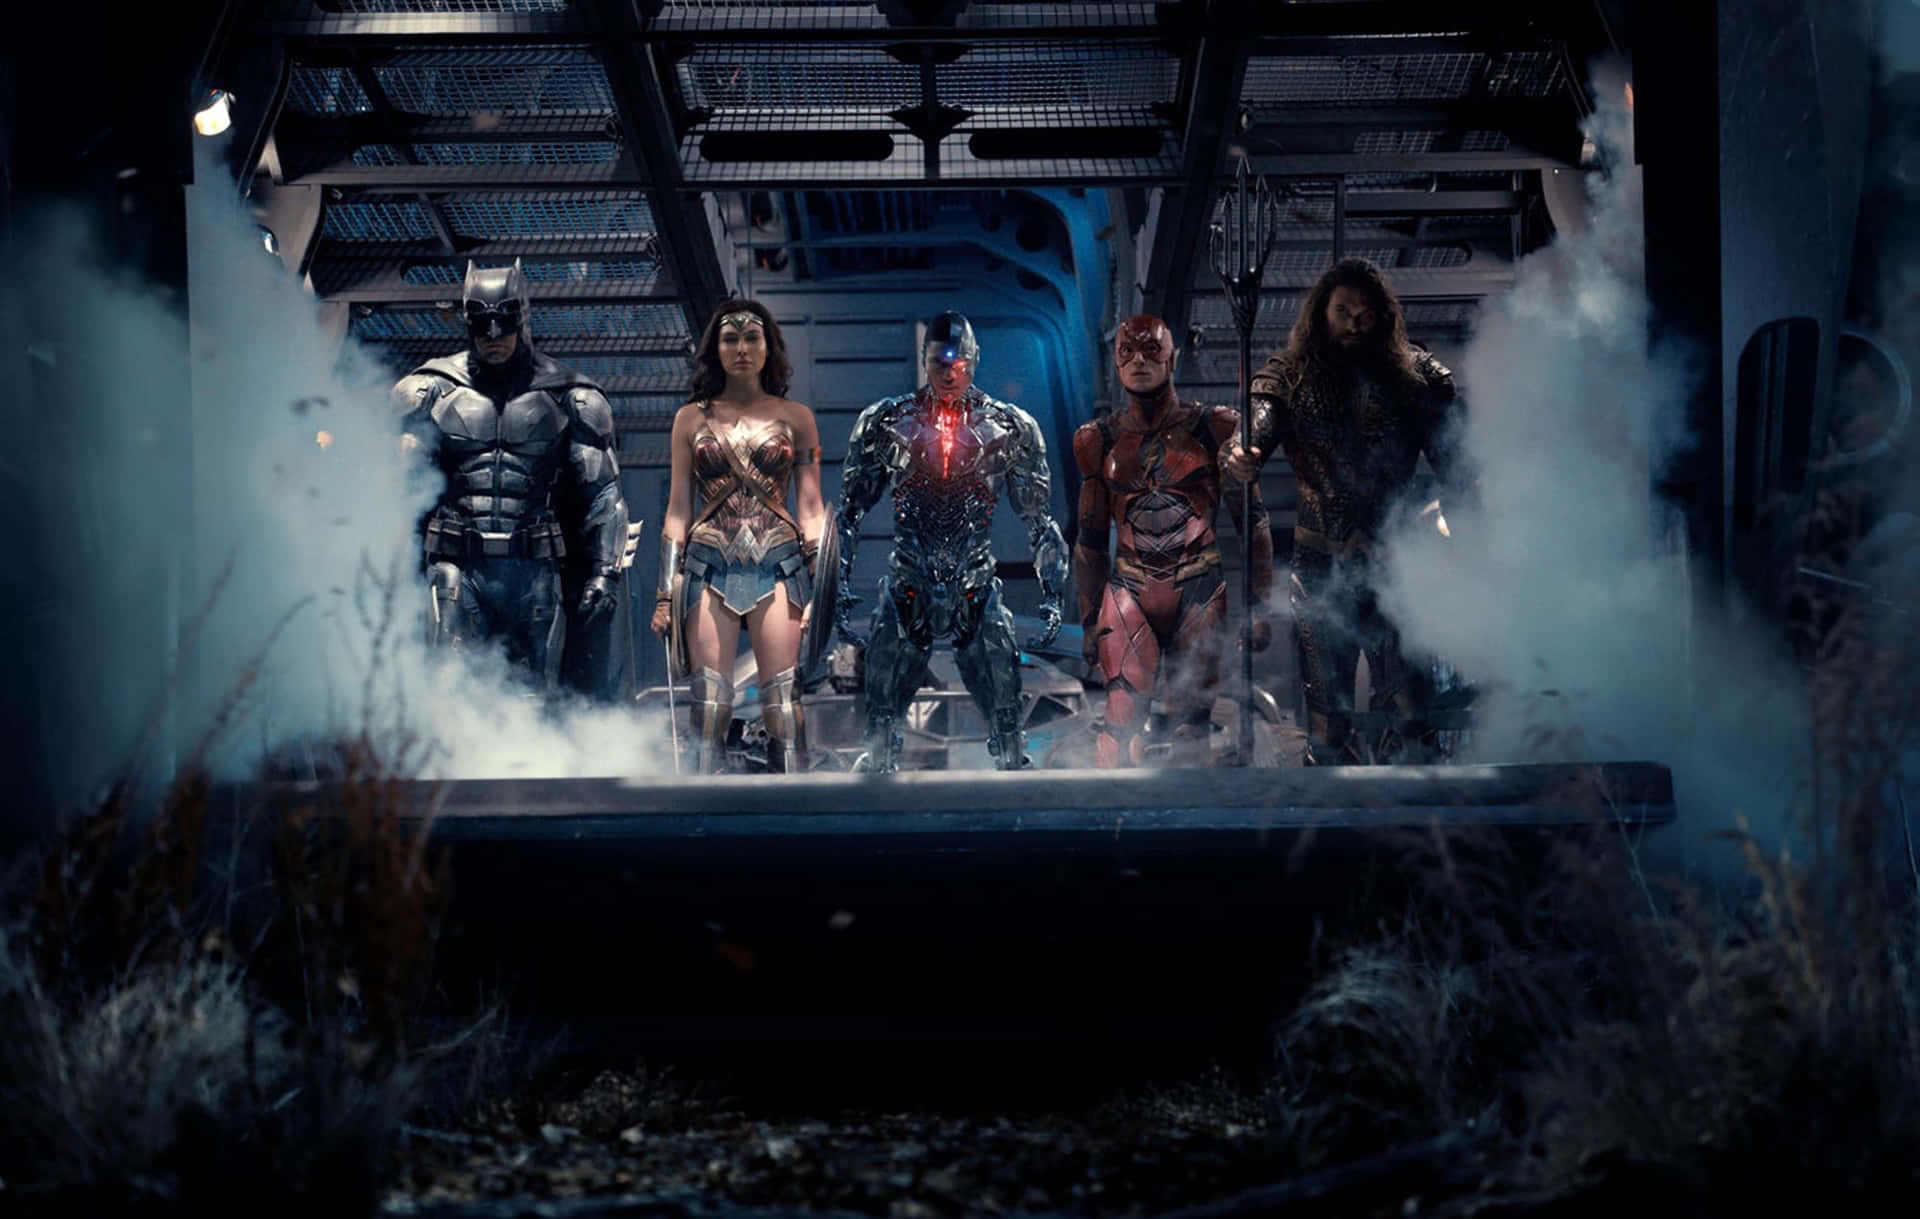 Image  Gal Gadot, Ben Affleck and Jason Momoa in Zack Snyder's Justice League Wallpaper